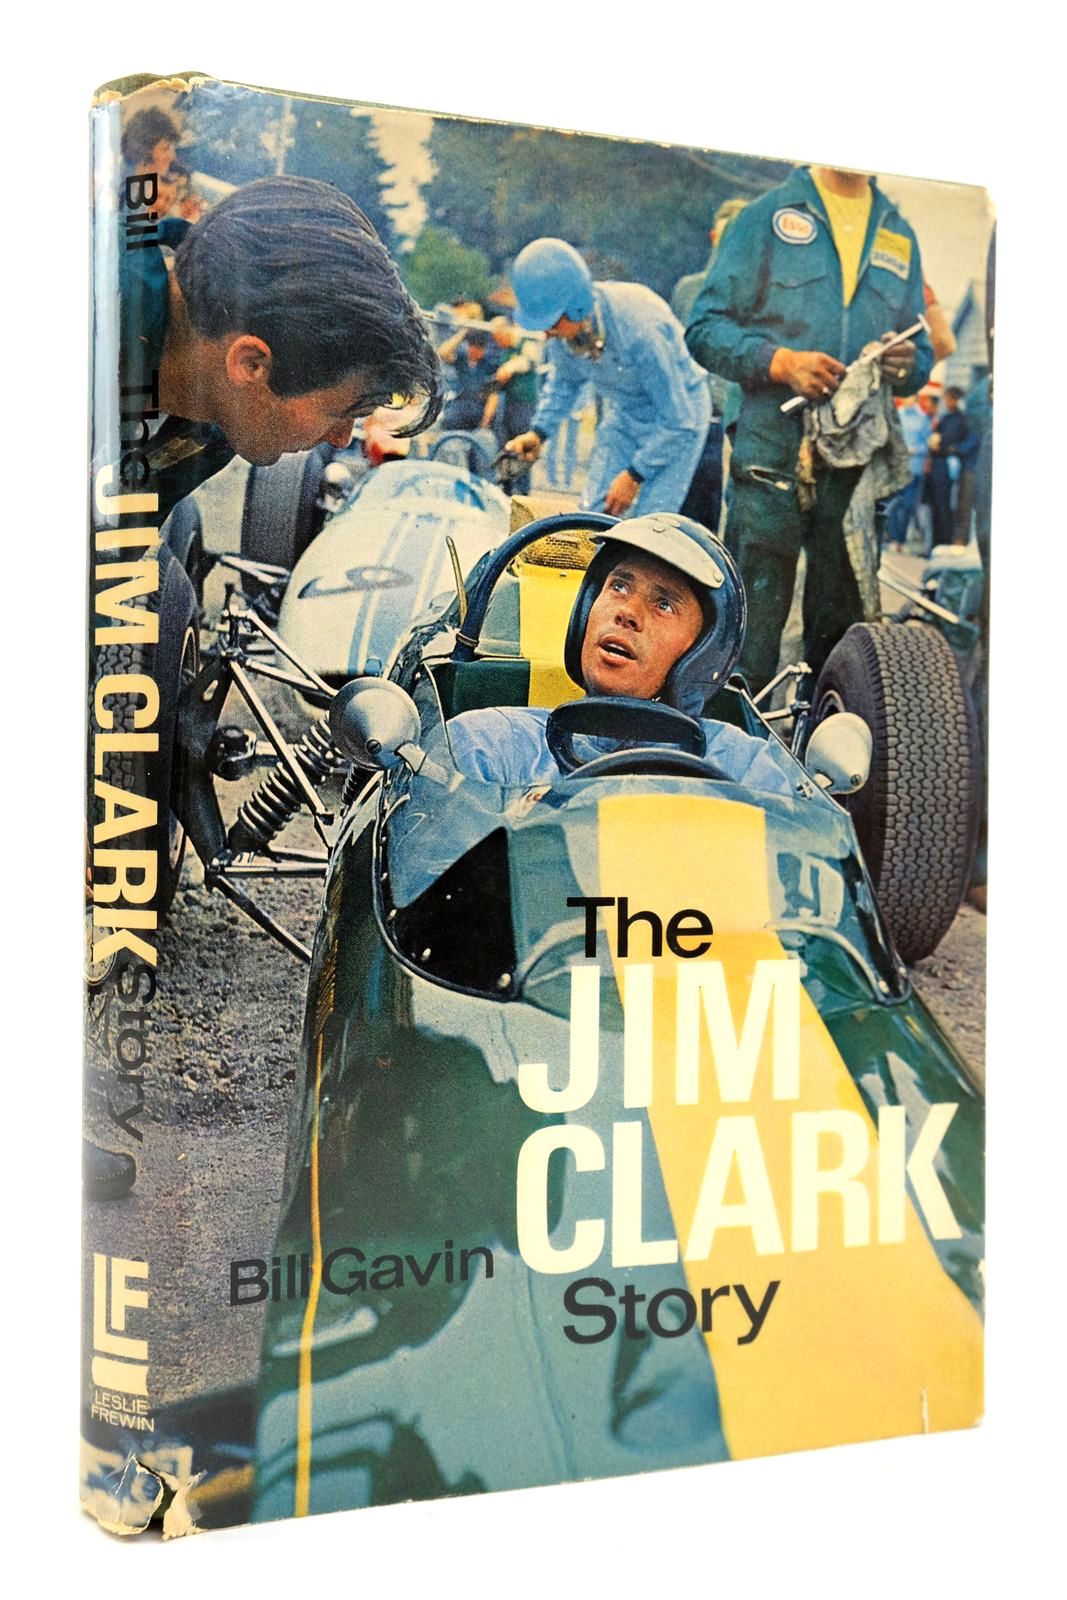 Photo of THE JIM CLARK STORY written by Gavin, Bill published by Leslie Frewin (STOCK CODE: 2139533)  for sale by Stella & Rose's Books